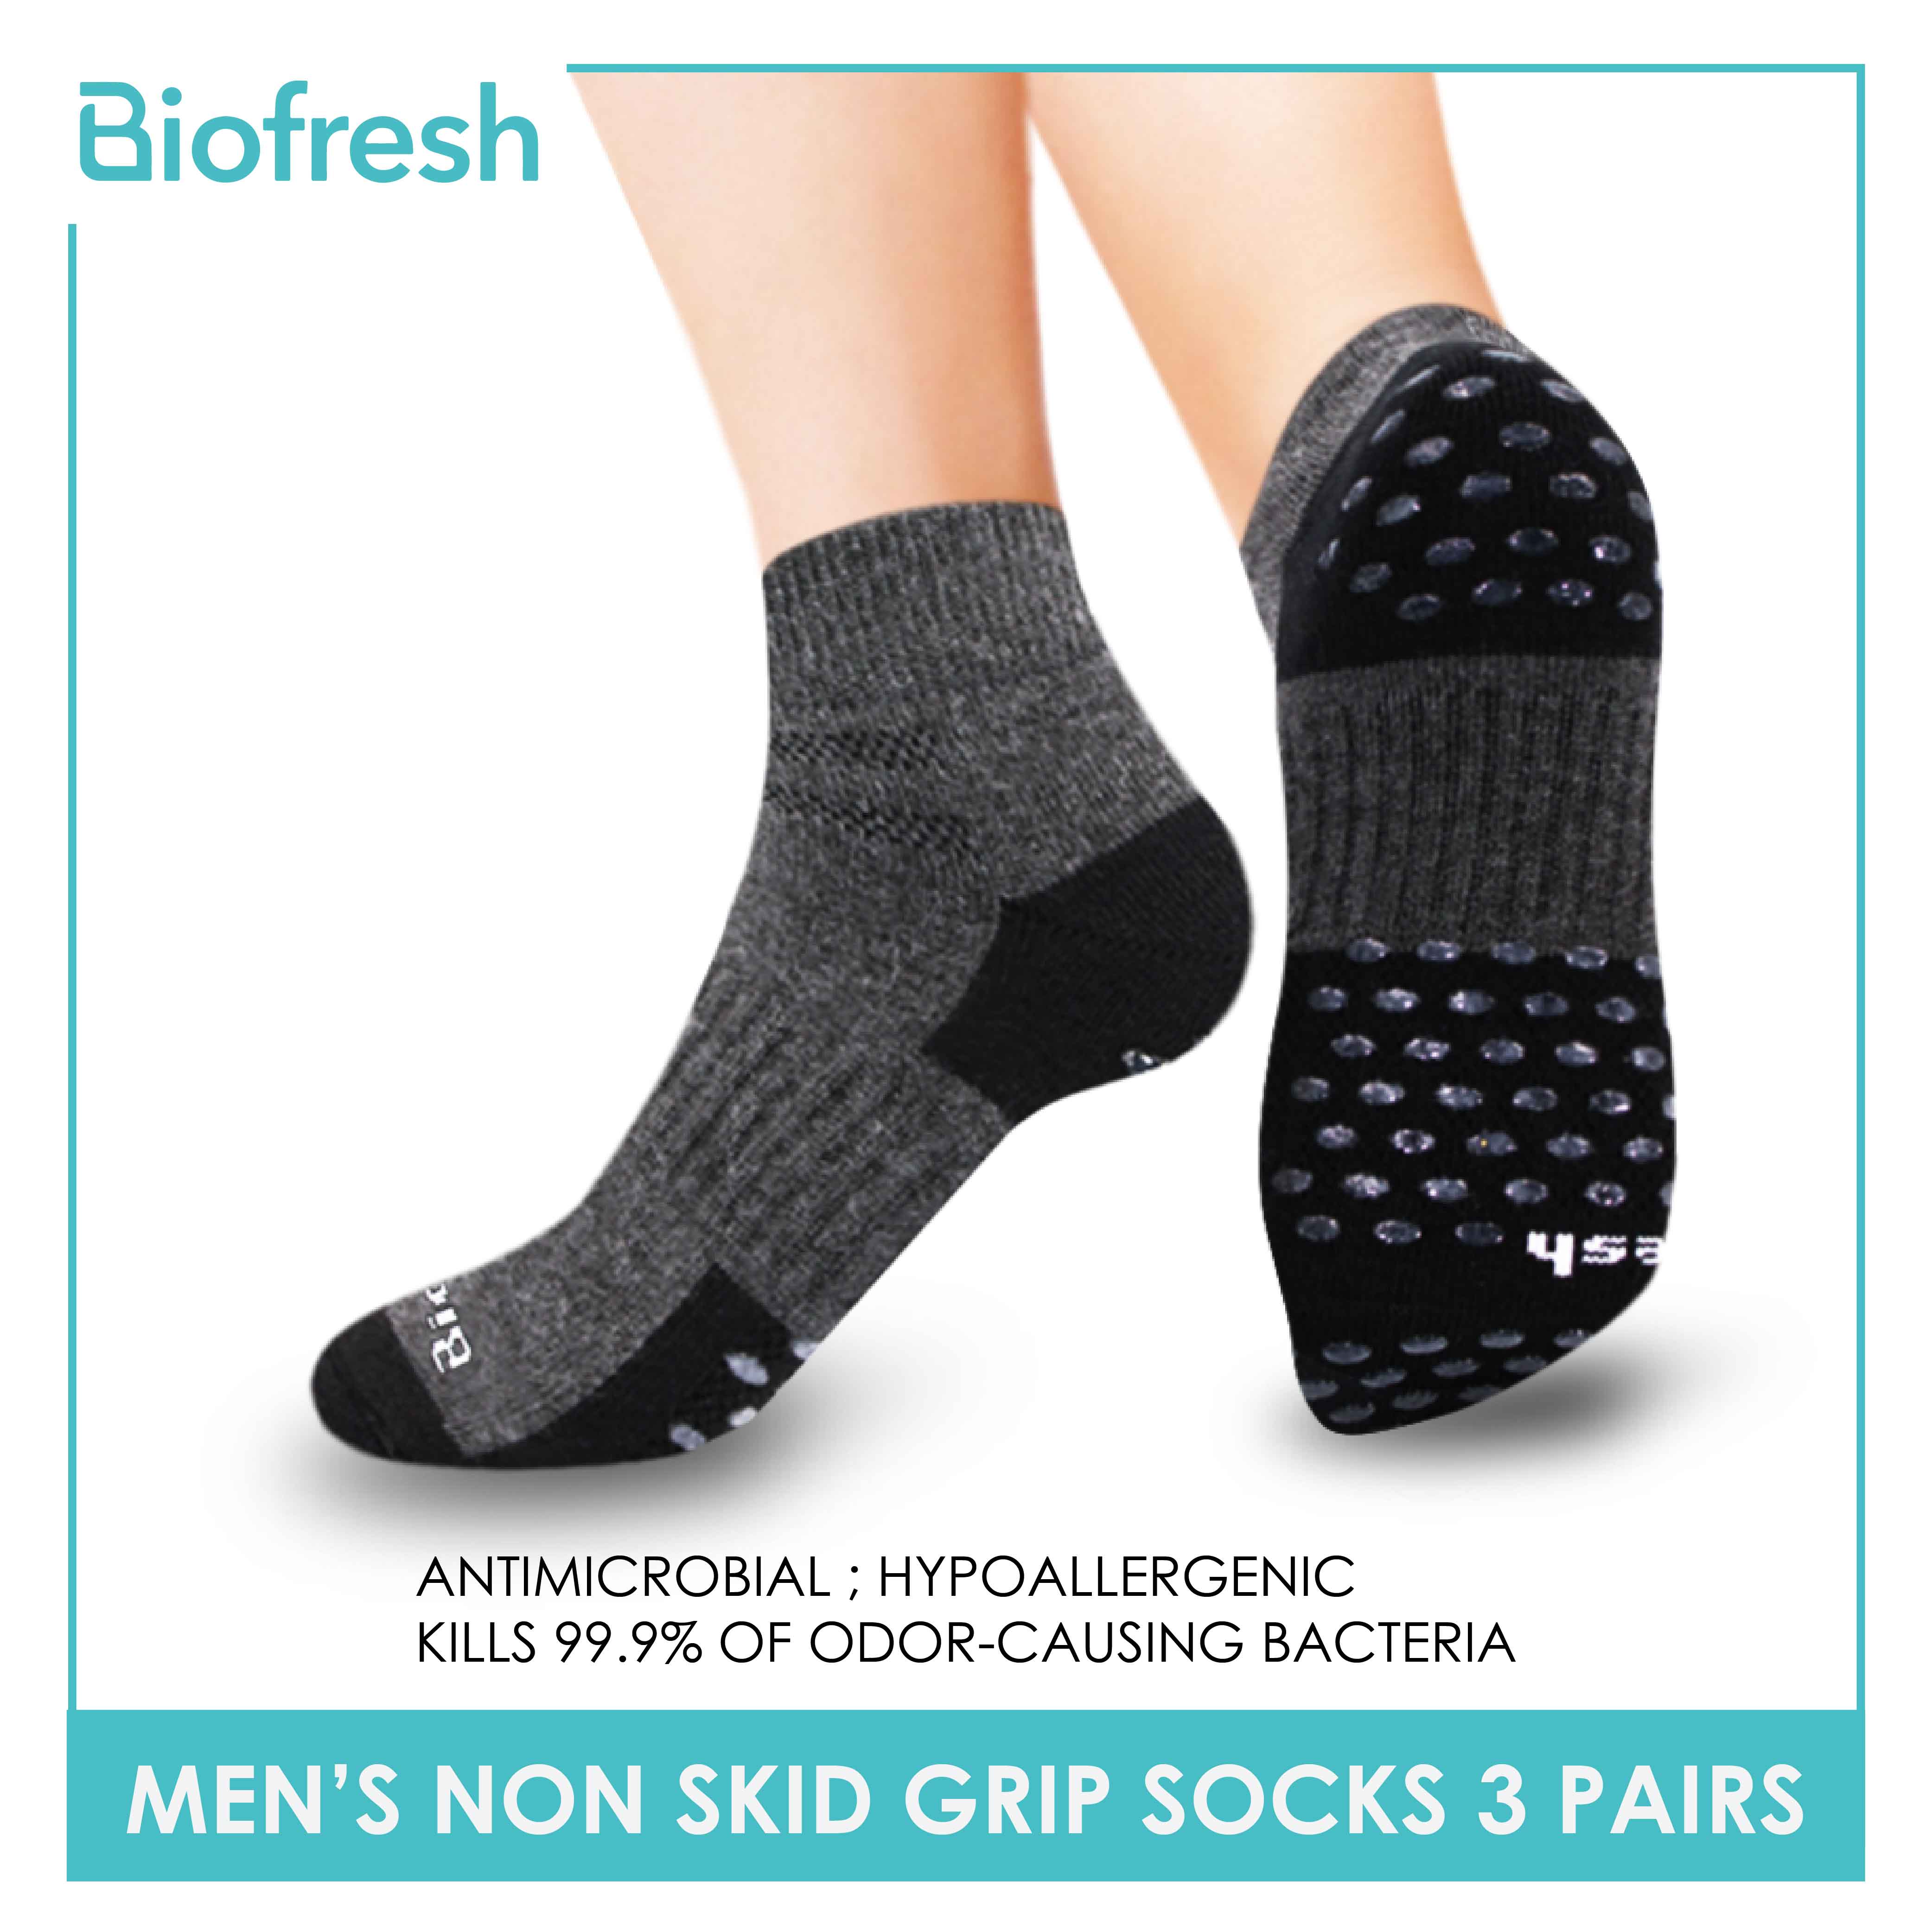 GripSox Anklet, GripSox